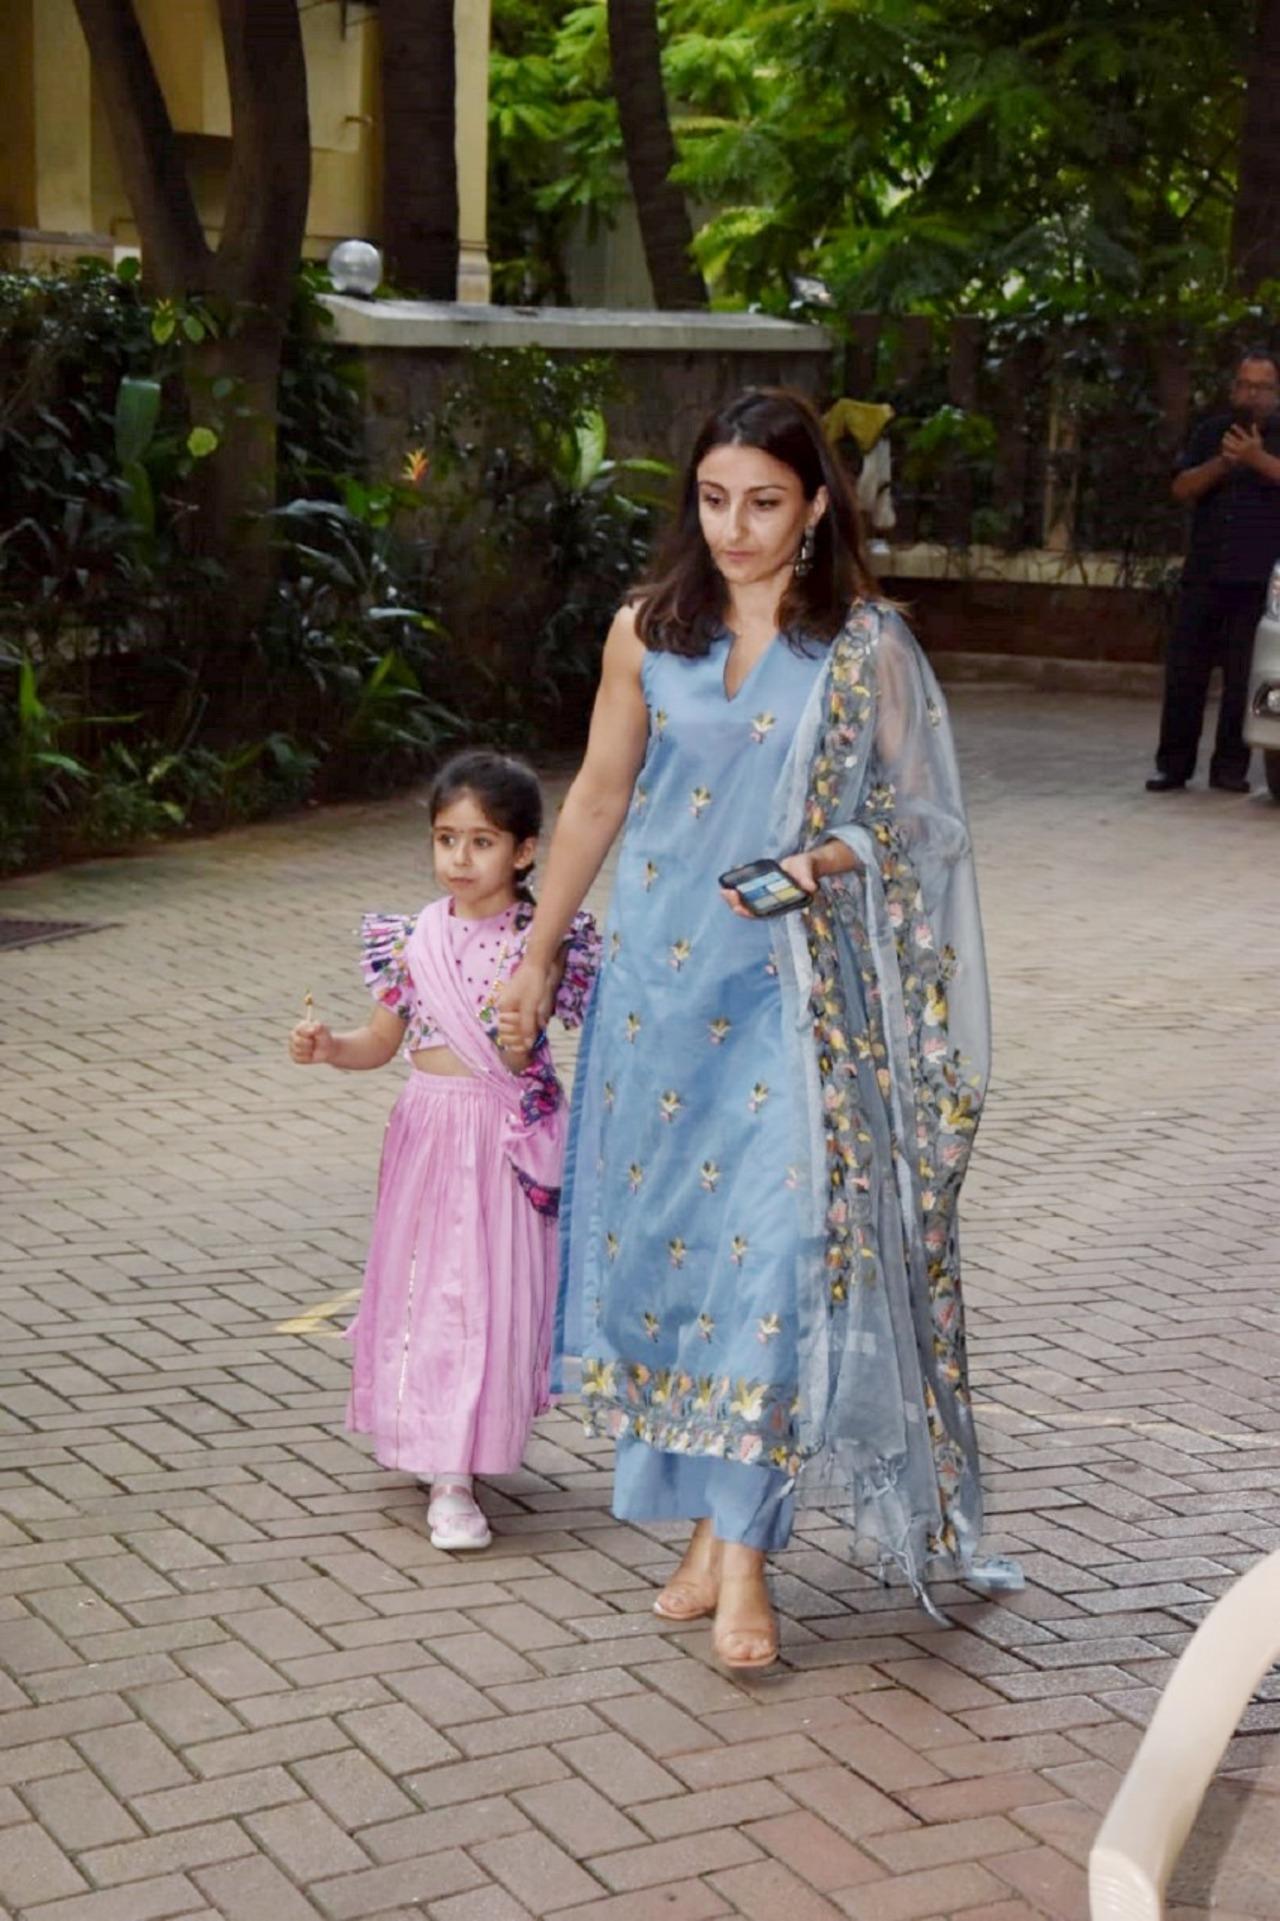 The mother-daughter duo looked lovely in traditional outfits